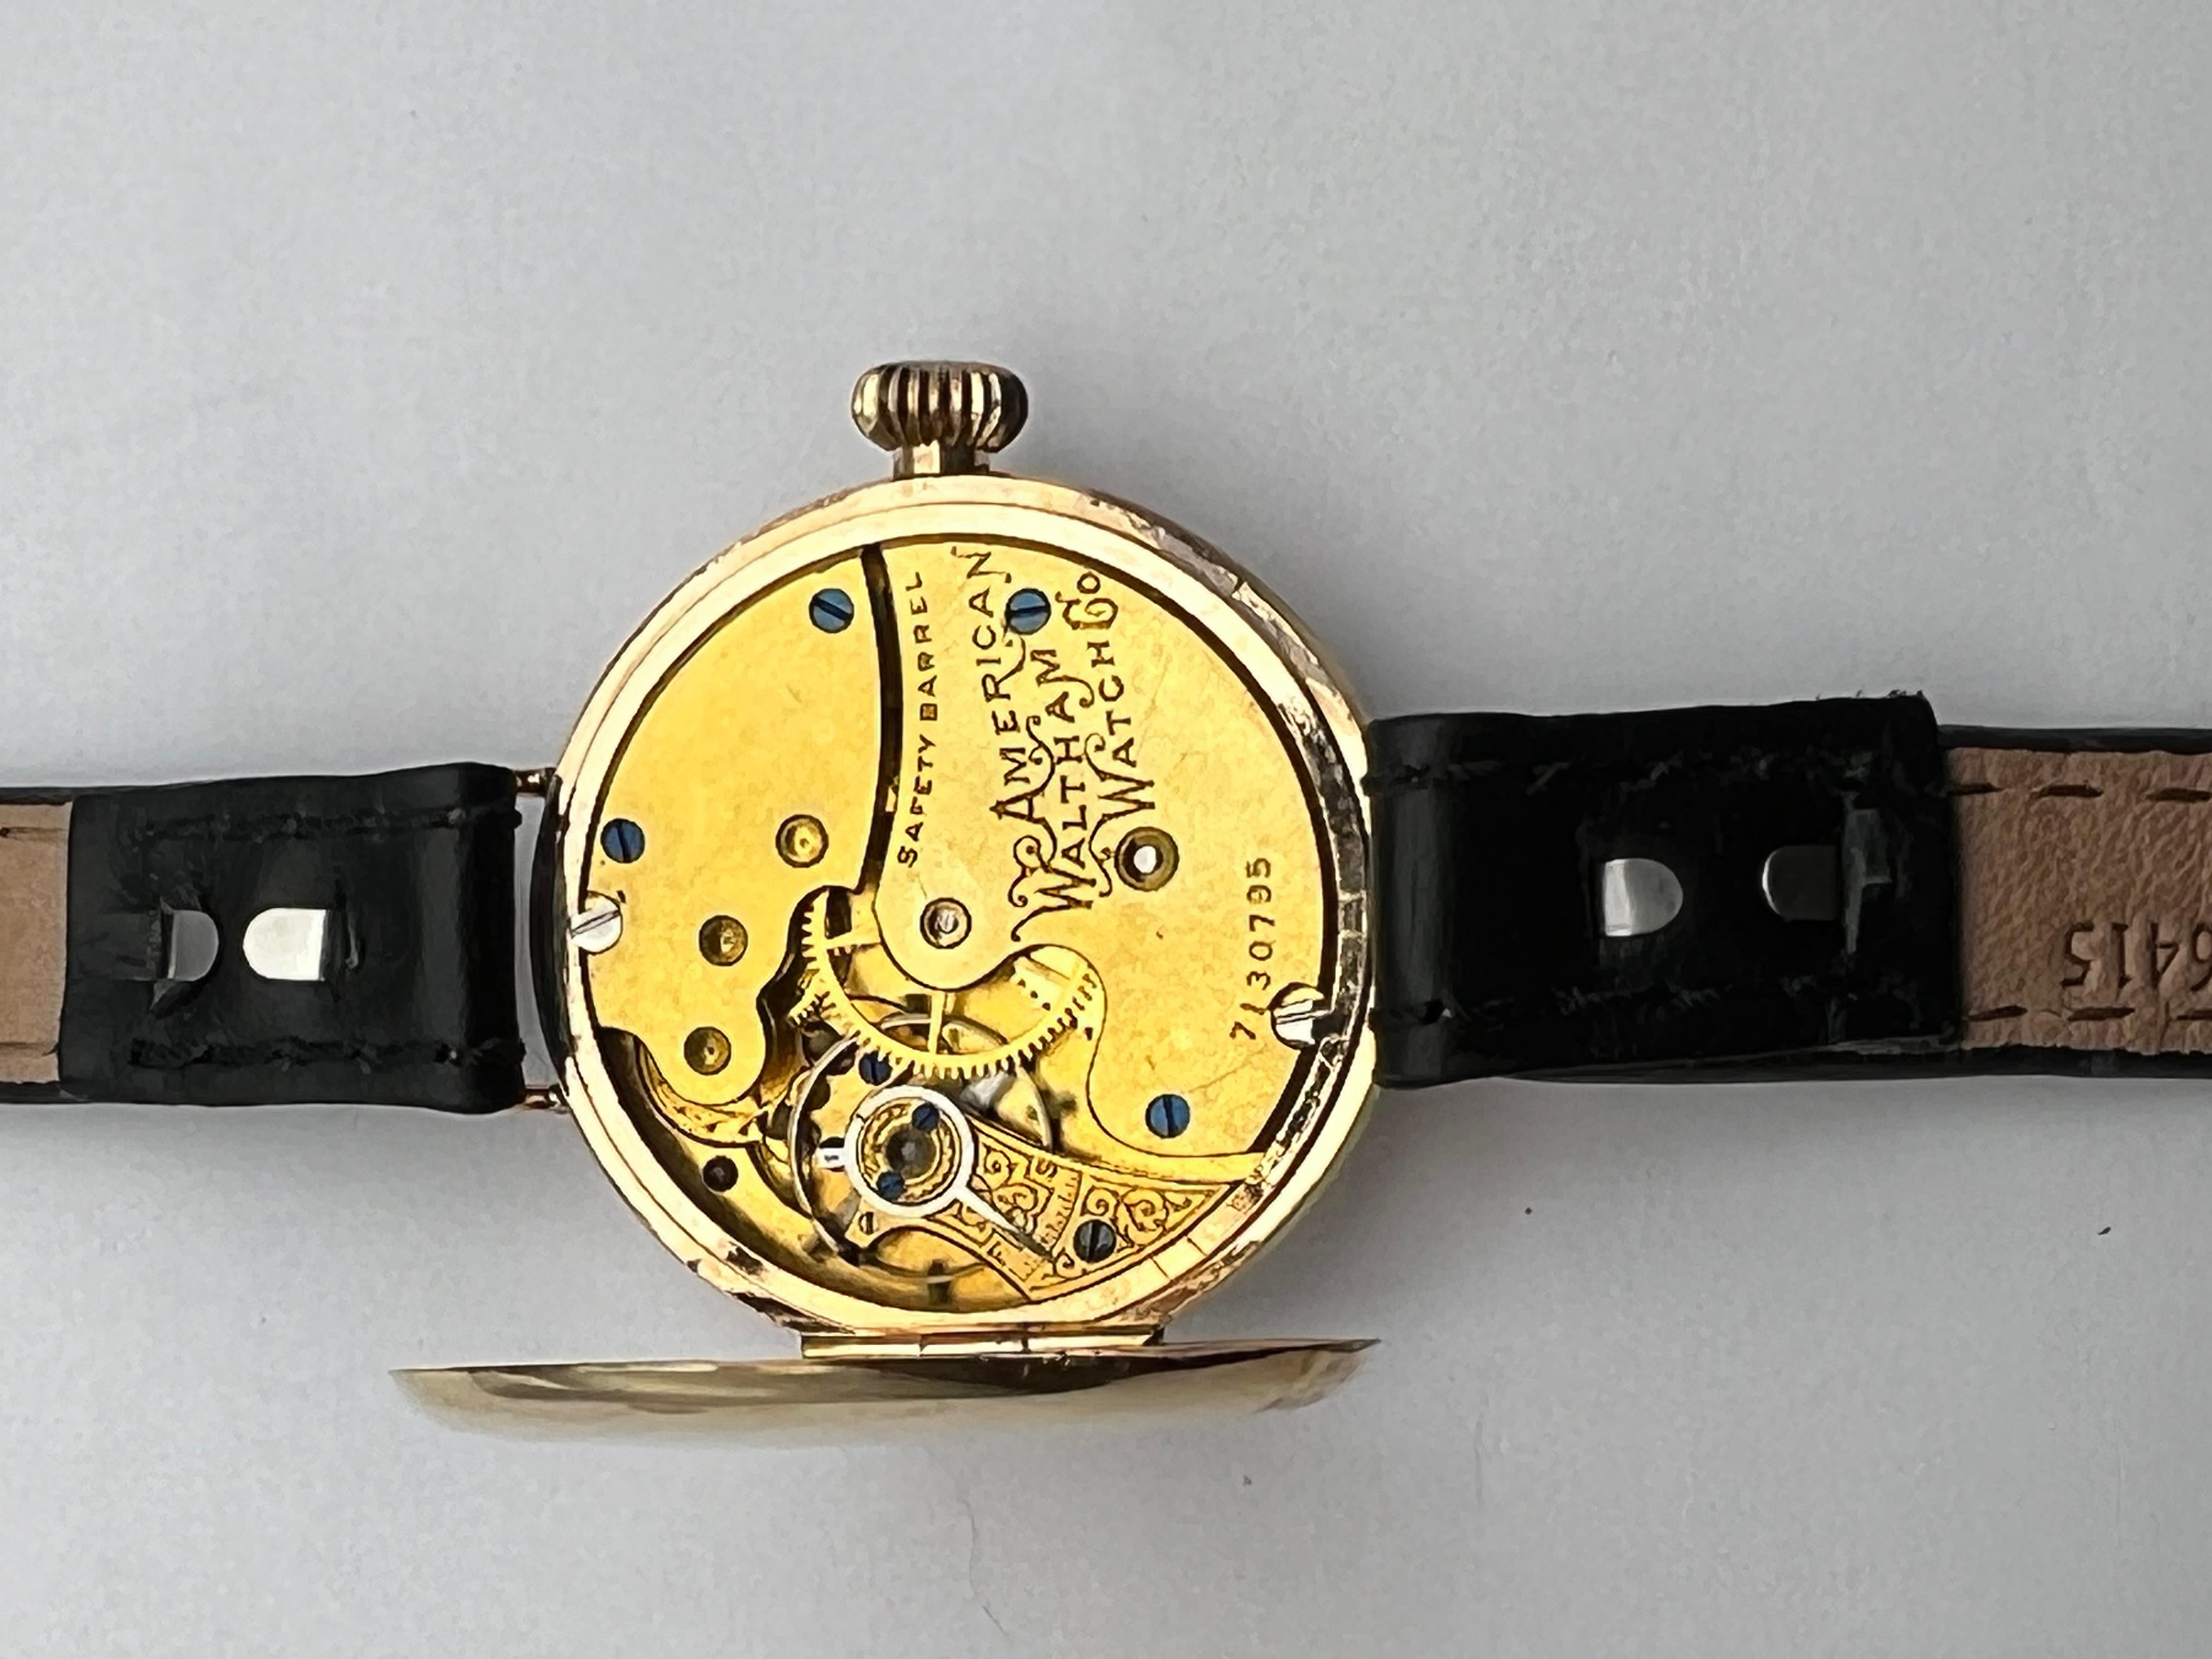 1898, Waltham 7 Jewel, Sublime Fancy Dial, Yellow Gold Filled For Sale 6